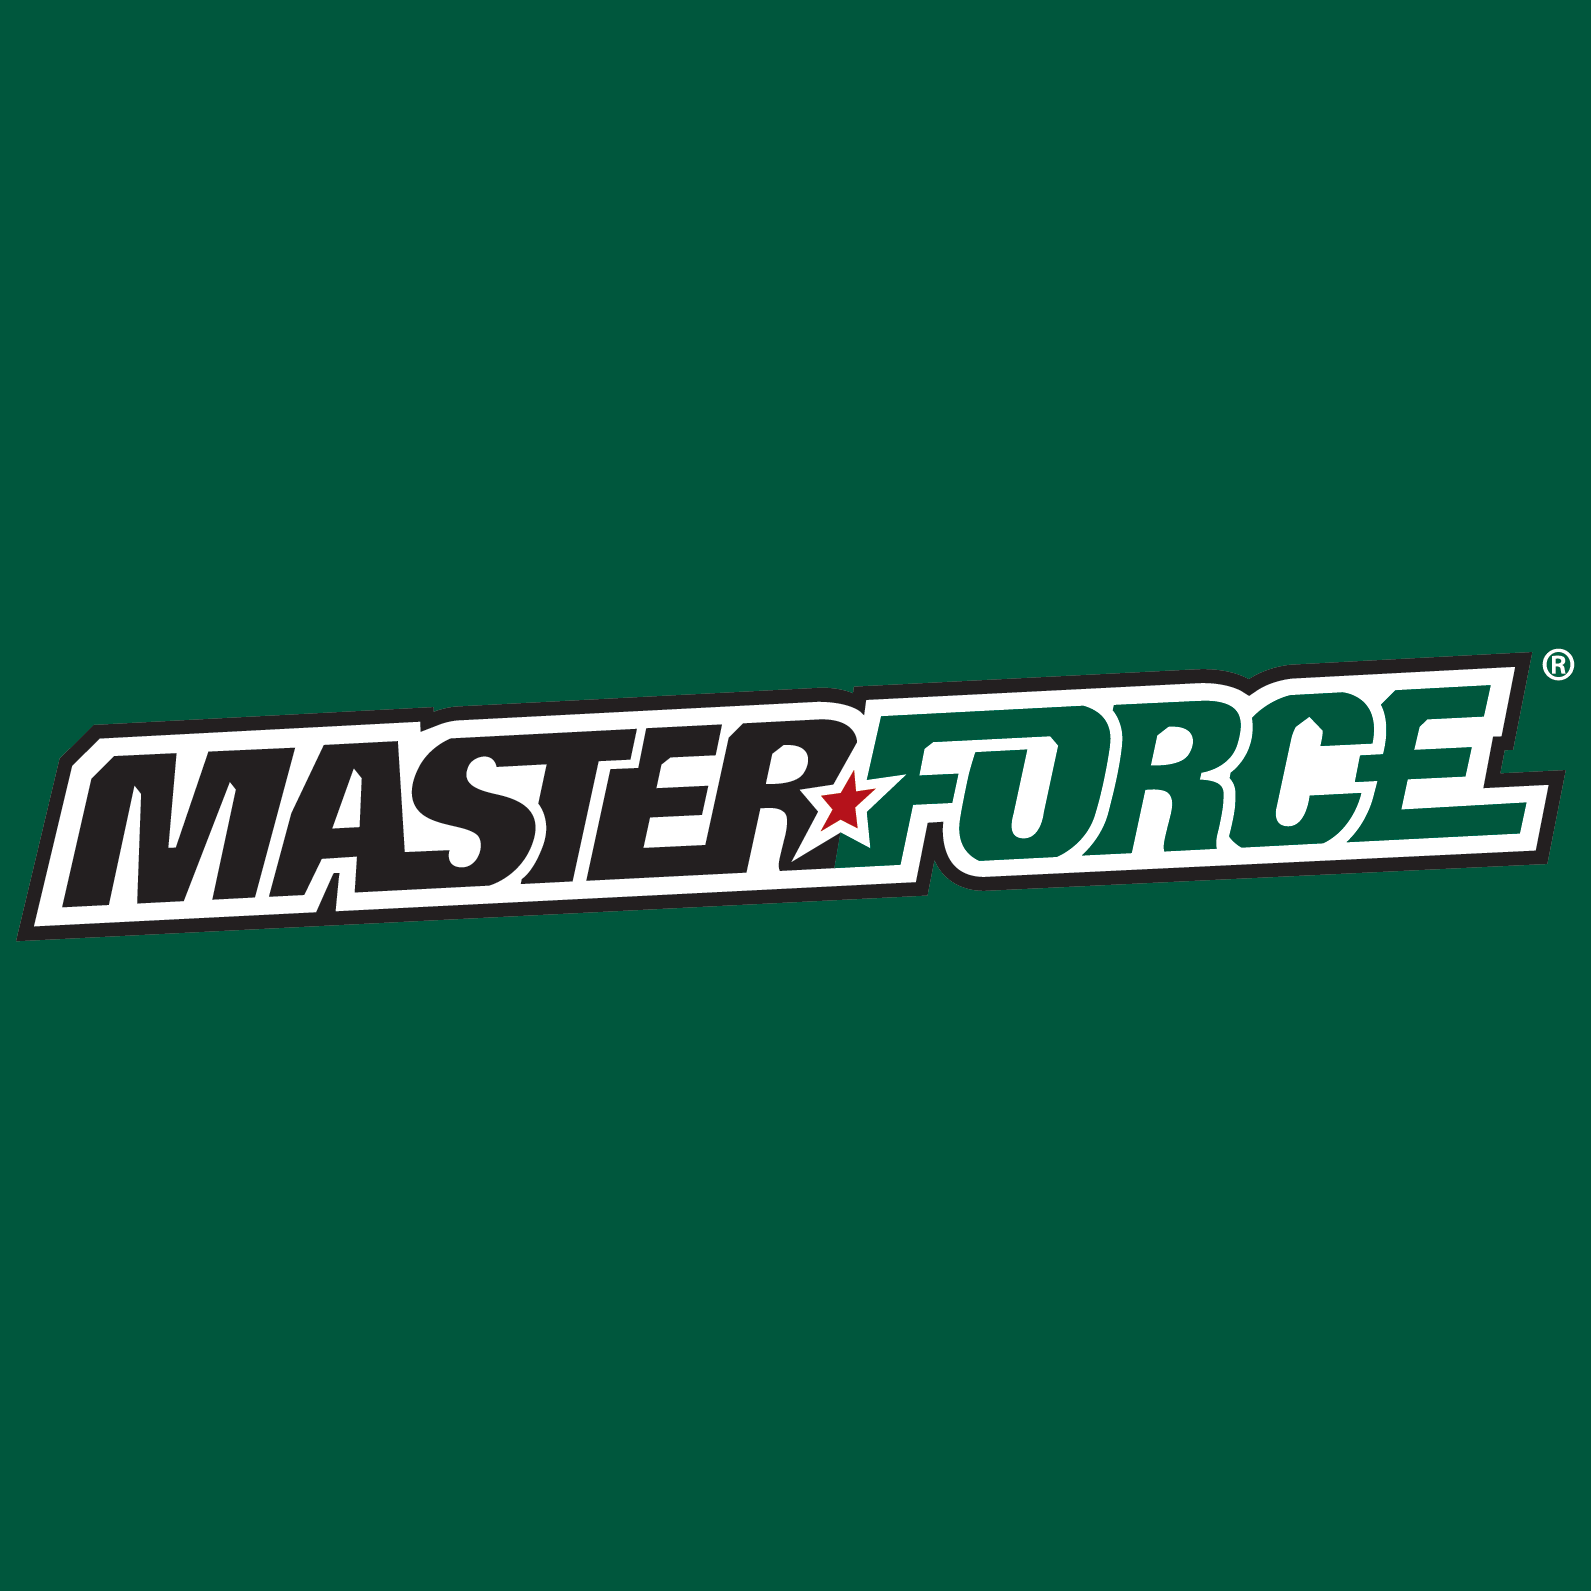 Master-force